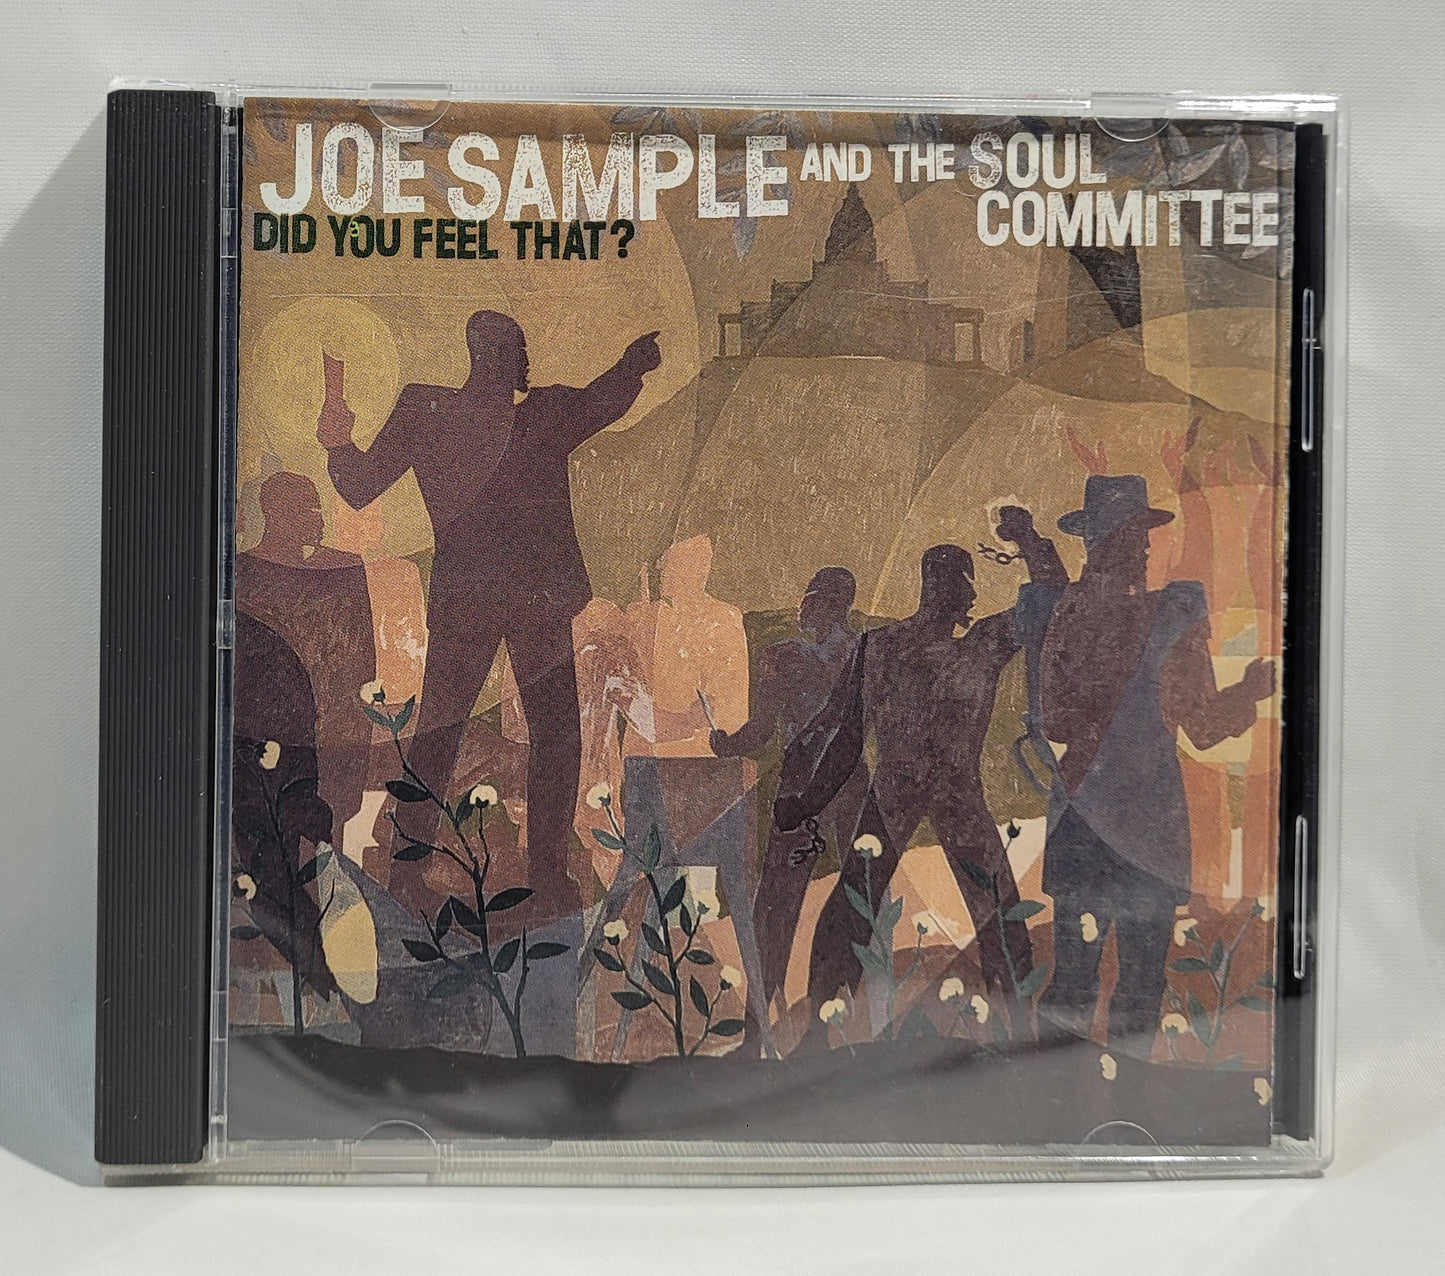 Joe Sample and The Soul Committee - Did You Feel That? [CD]